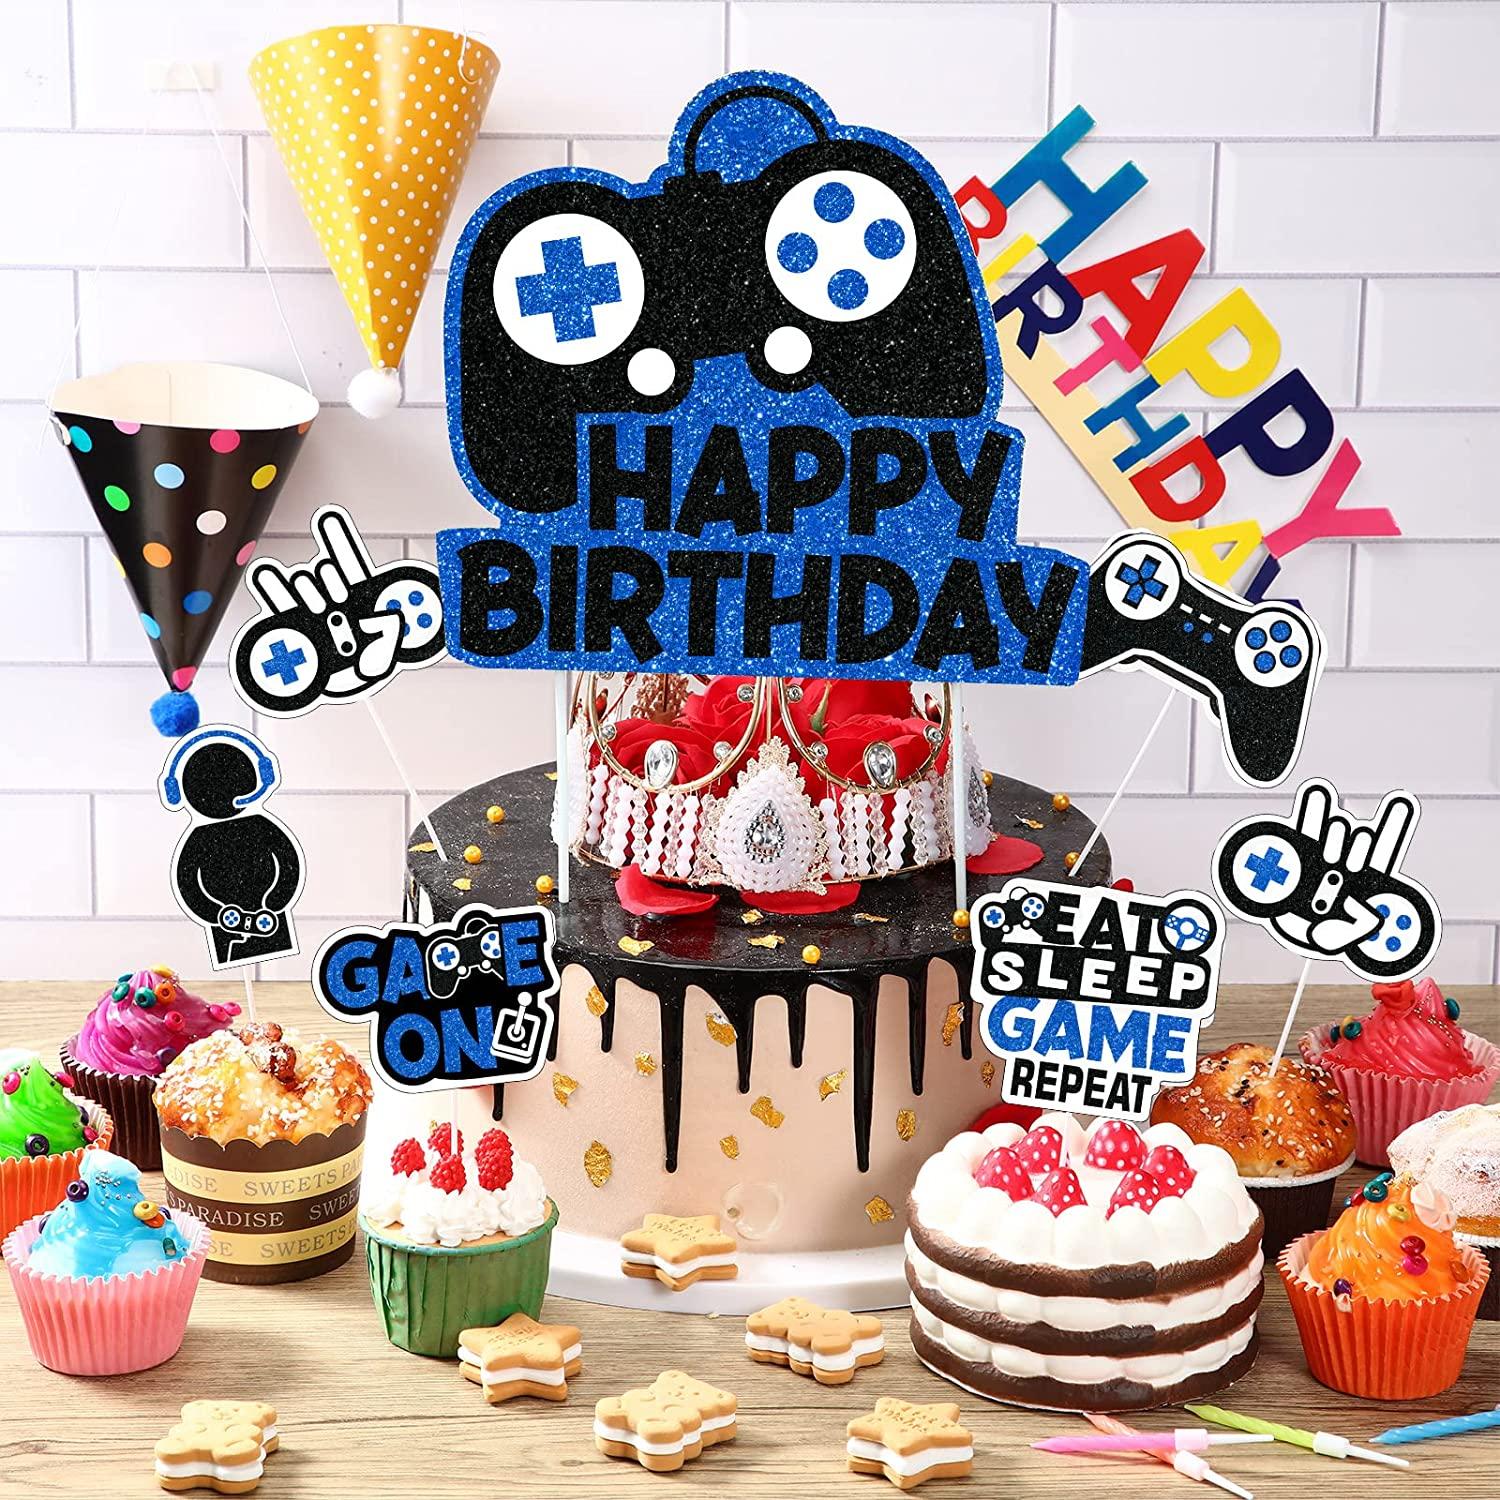  4PCS Level 9 Birthday Cake Toppers - Blue Glitter Video Game  9th Birthday Cake Picks - Boy's Birthday Gaming Theme Cupcake Toppers set -  Level Up Winner Party Decoration Supplies 